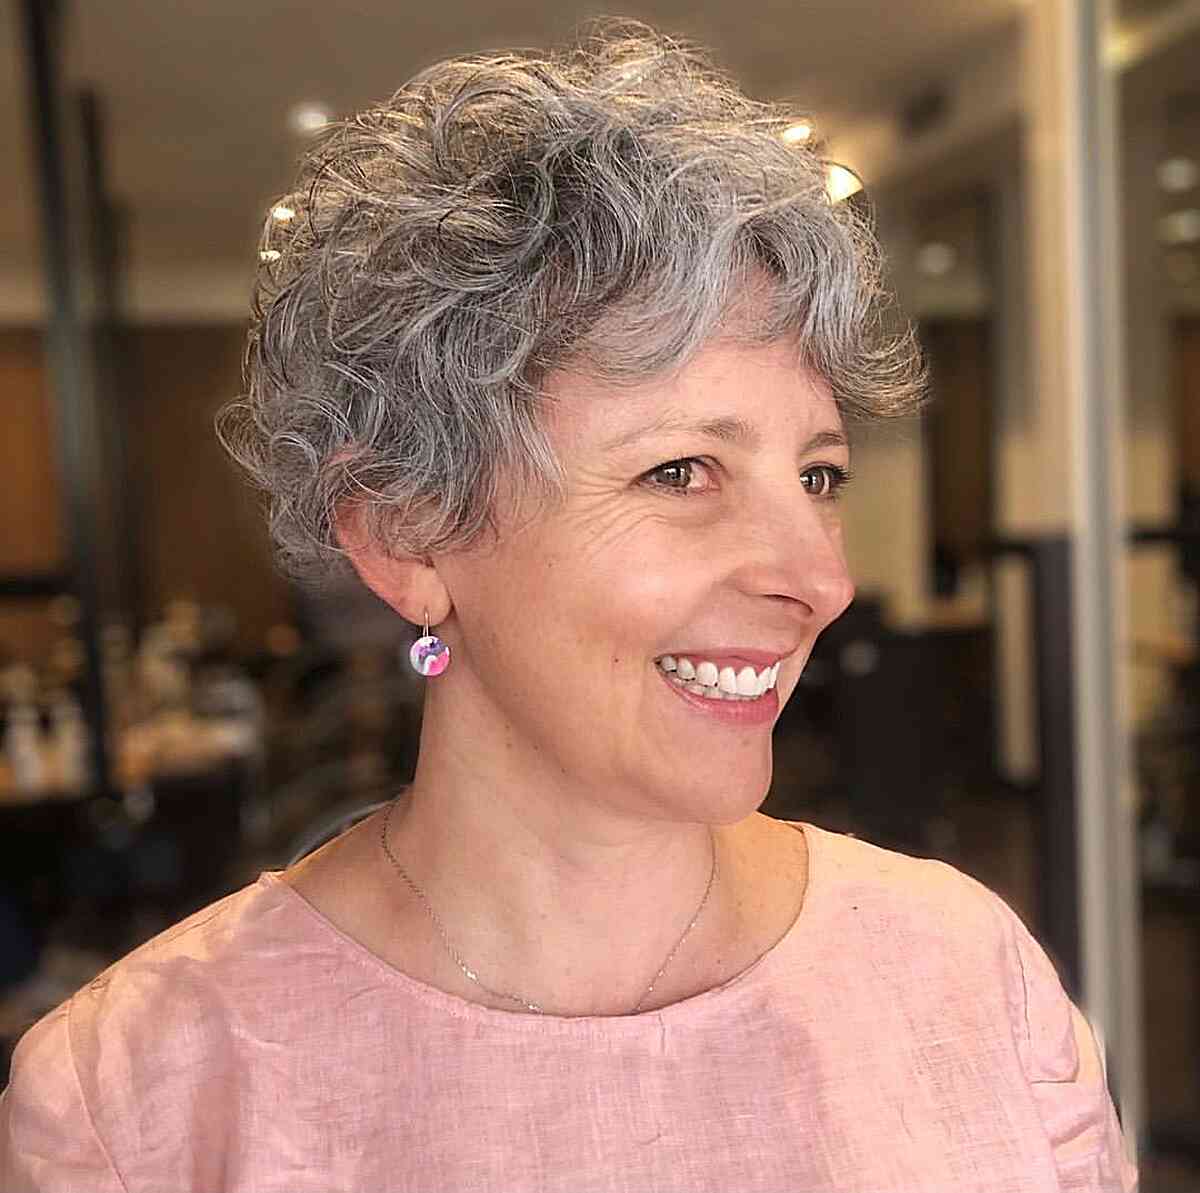 Fluffy Silver Pixie on Natural Curls with Short Curtain Bangs for Ladies Over 50